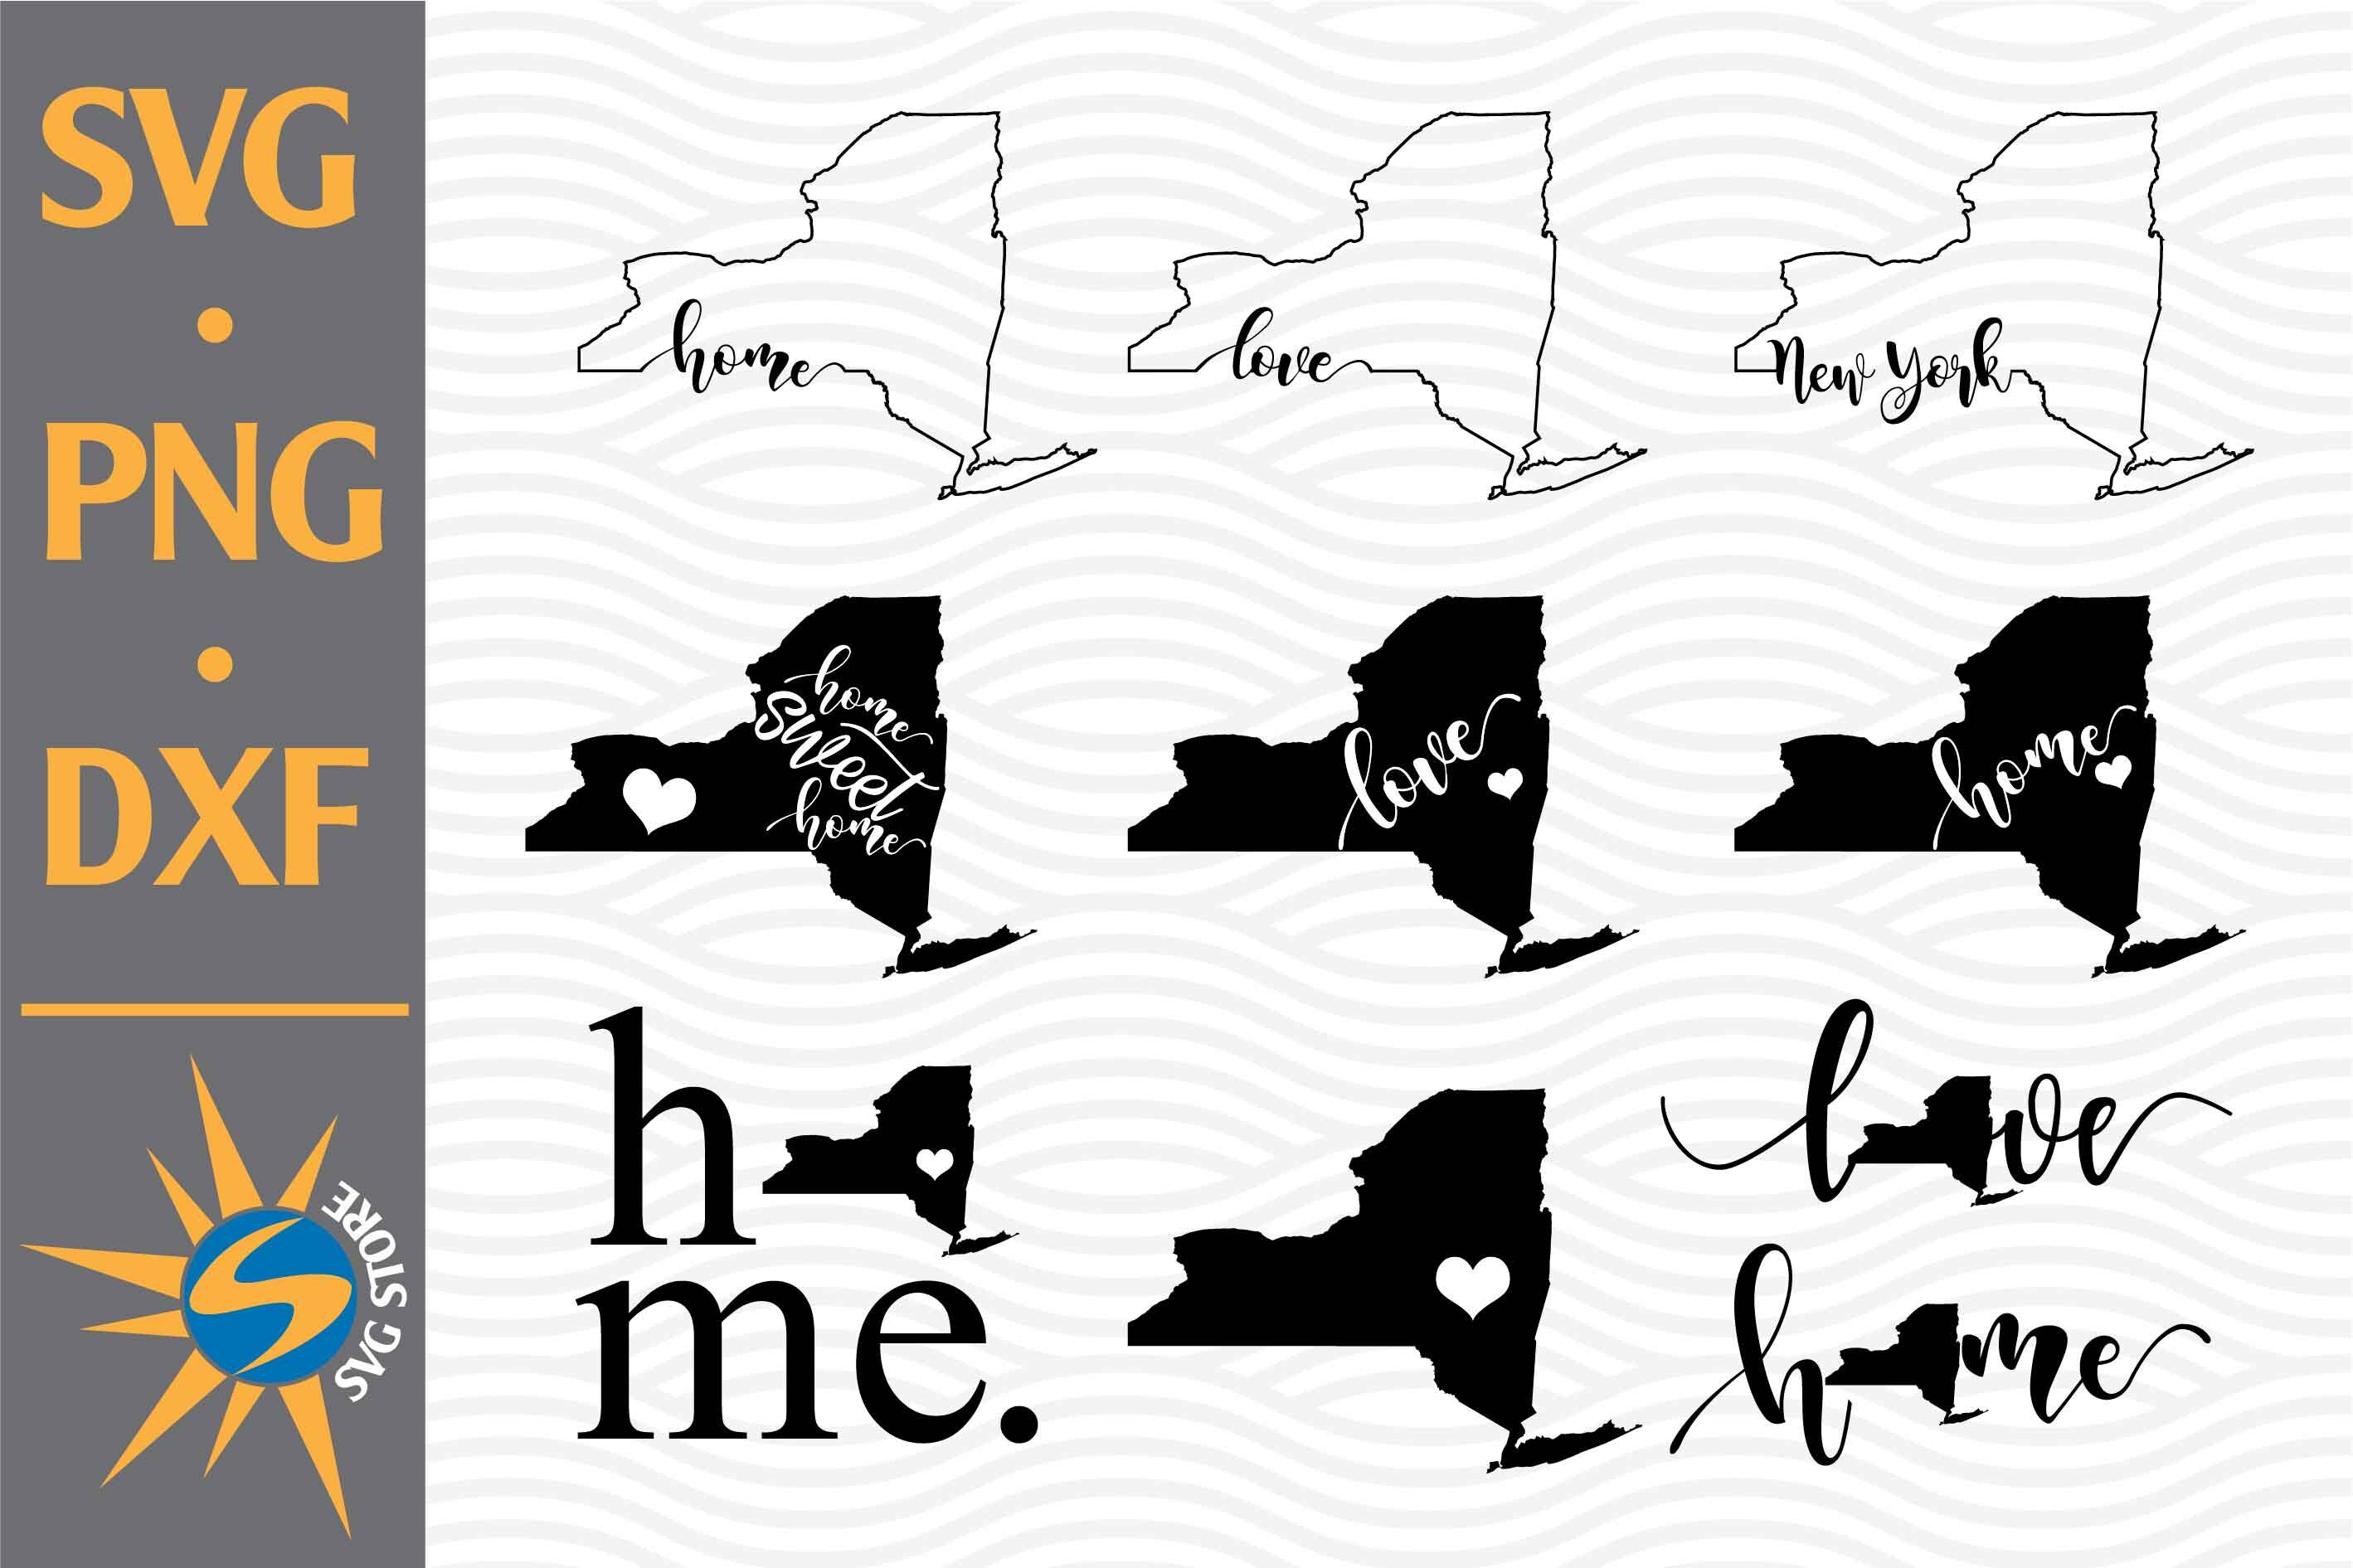 Download Instant Download Jpeg Png Svg Pdf Eps Dxf Tennessee Square Home State And Love State Svg State Home And State Love Stencils Templates Craft Supplies Tools Kromasol Com